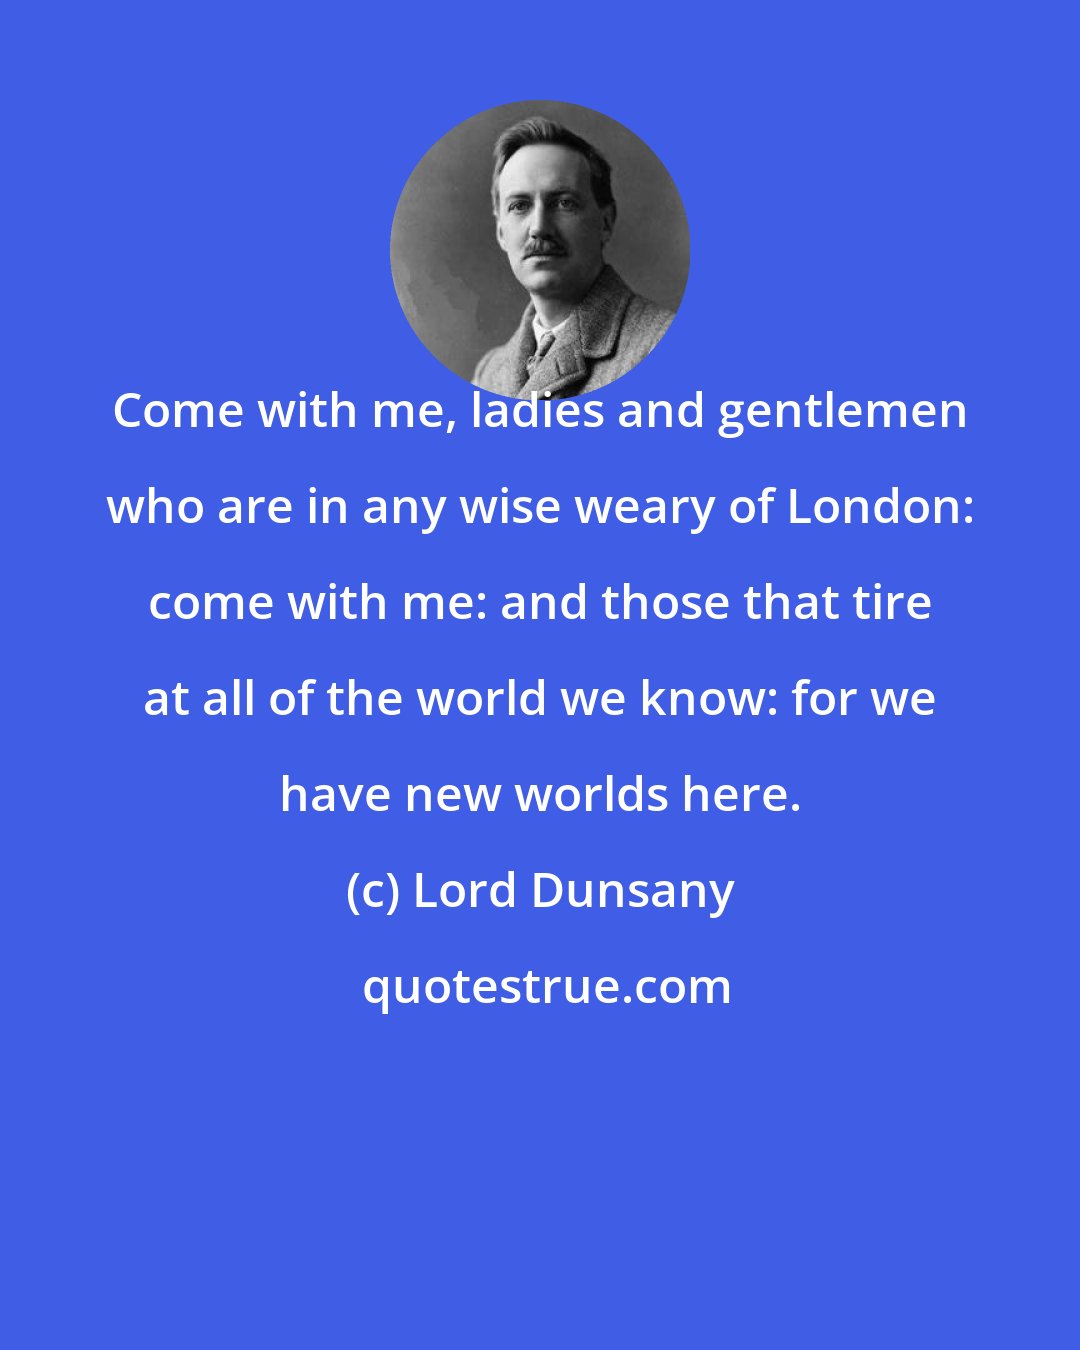 Lord Dunsany: Come with me, ladies and gentlemen who are in any wise weary of London: come with me: and those that tire at all of the world we know: for we have new worlds here.